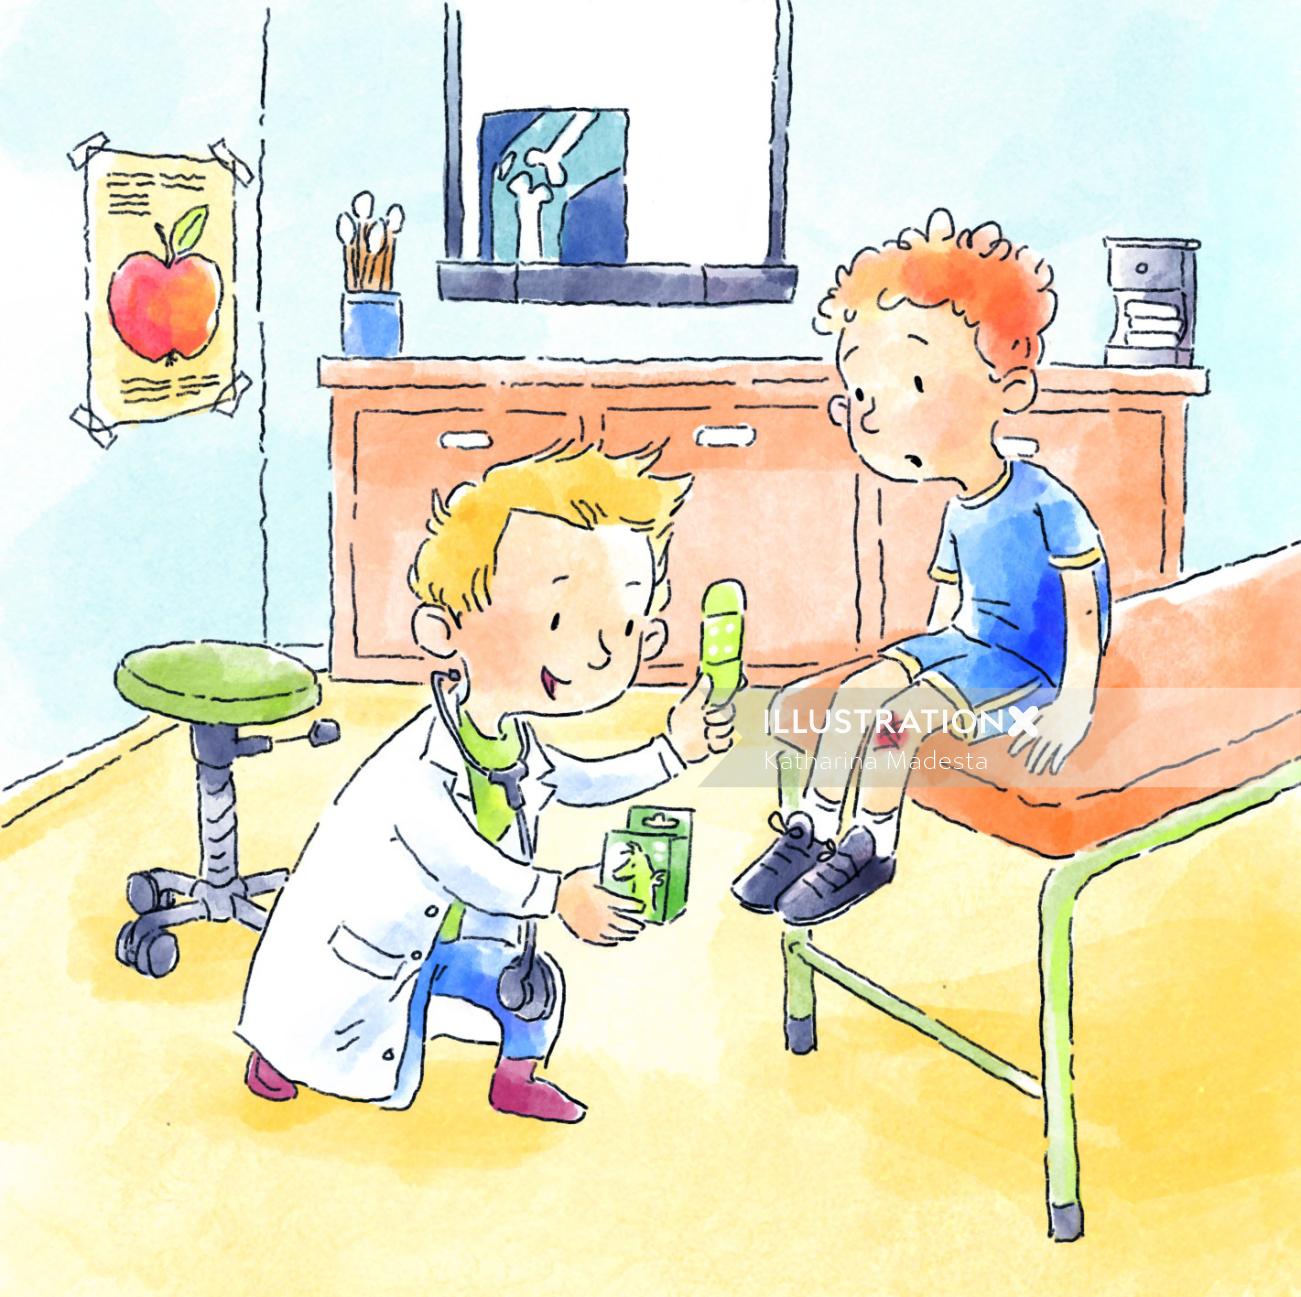 Cartoon & Humour doctor treating a wound